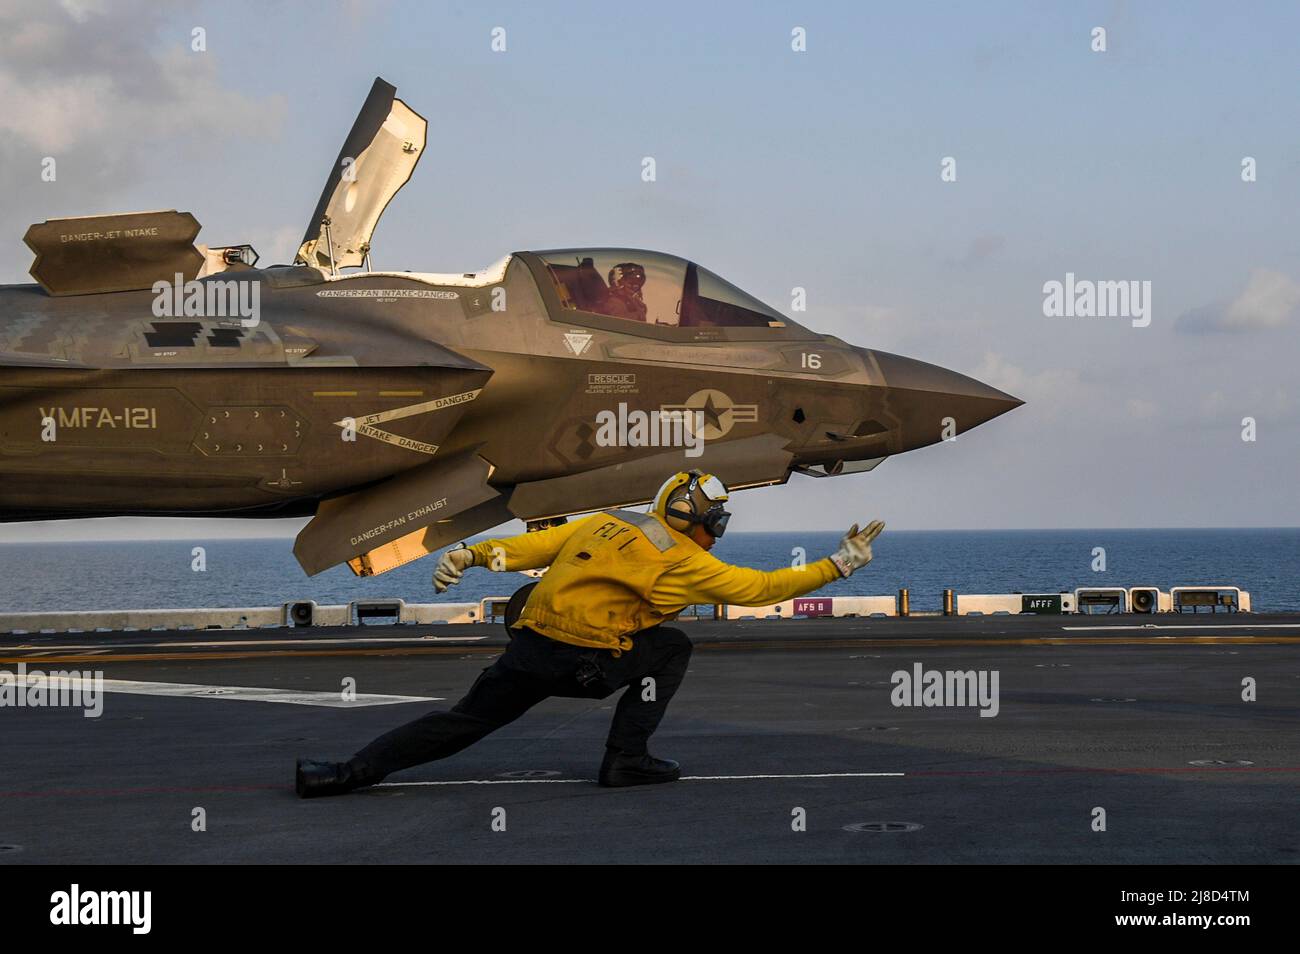 A U.S. Marine Corps F-35B Lightning II fighter aircraft, attached to the Dragons of Marine Medium Tiltrotor Squadron 264, is signaled to take off from the flight deck of the America-class amphibious assault ship USS America during Exercise Cobra Gold 2020, February 29, 2020 operating on the Gulf of Thailand. Stock Photo